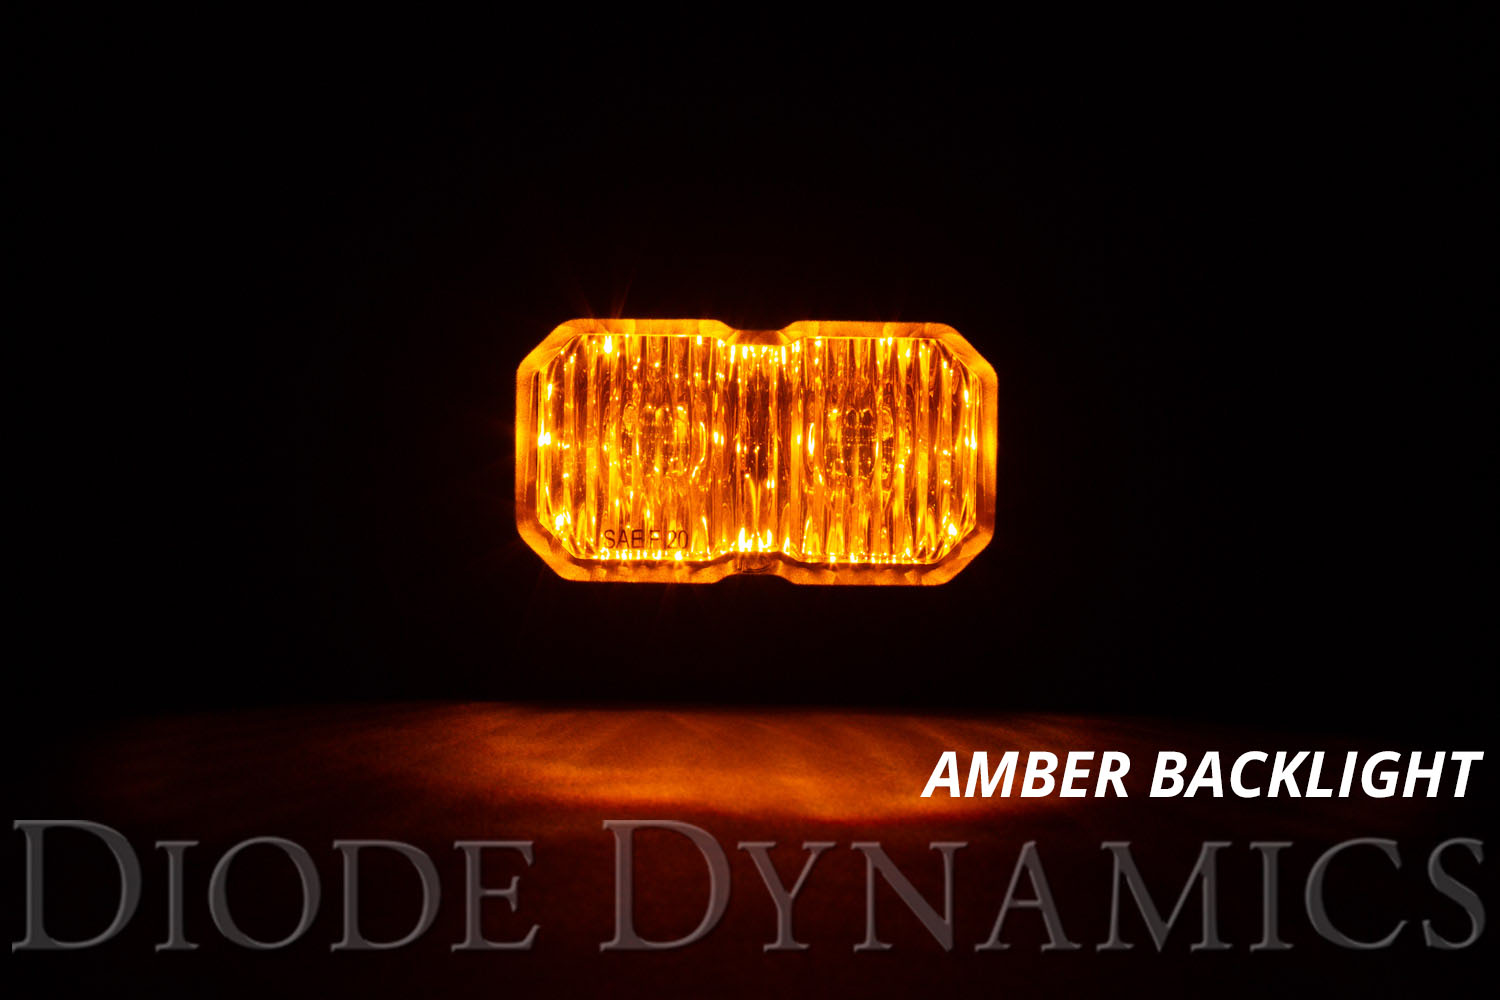 Diode Dynamics Stage Series 2 Inch LED Pod, Sport Yellow Driving Standard ABL Pair